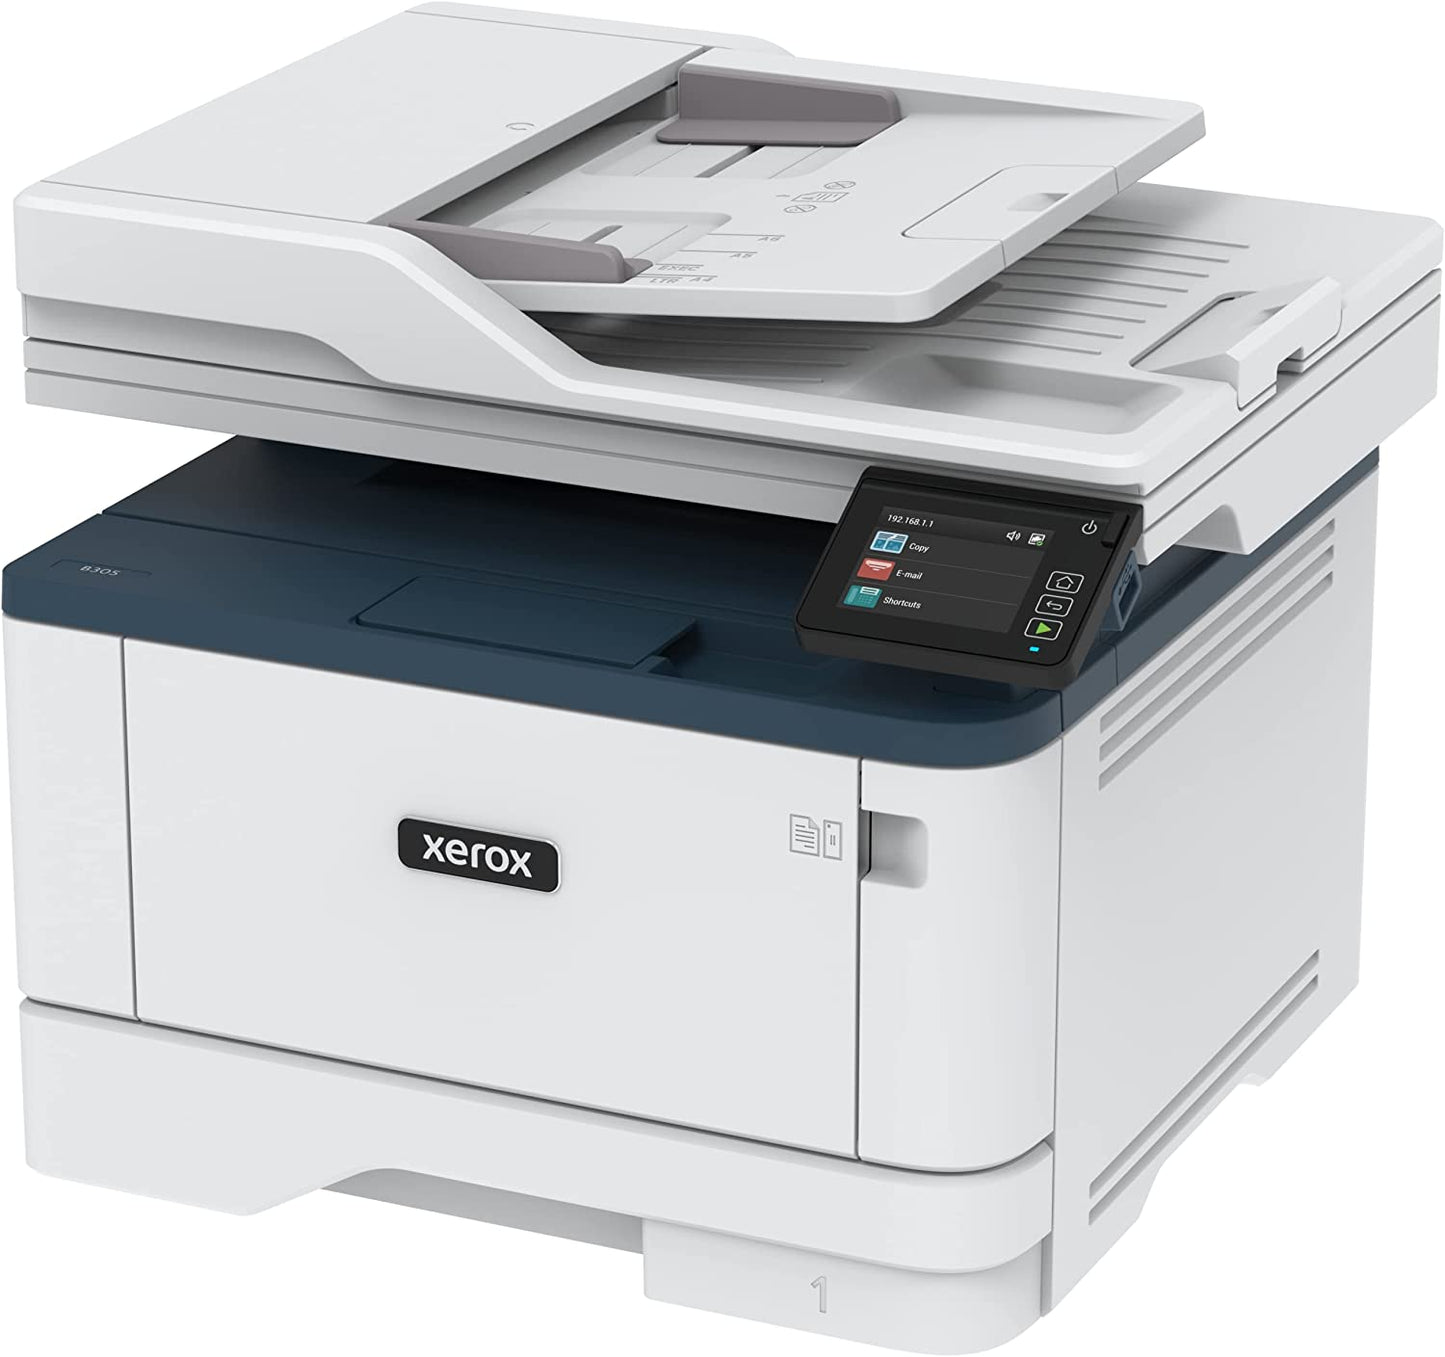 Xerox B305/DNI Multifunction Printer, Print/Scan/Copy, Black and White Laser, Wireless, All in One